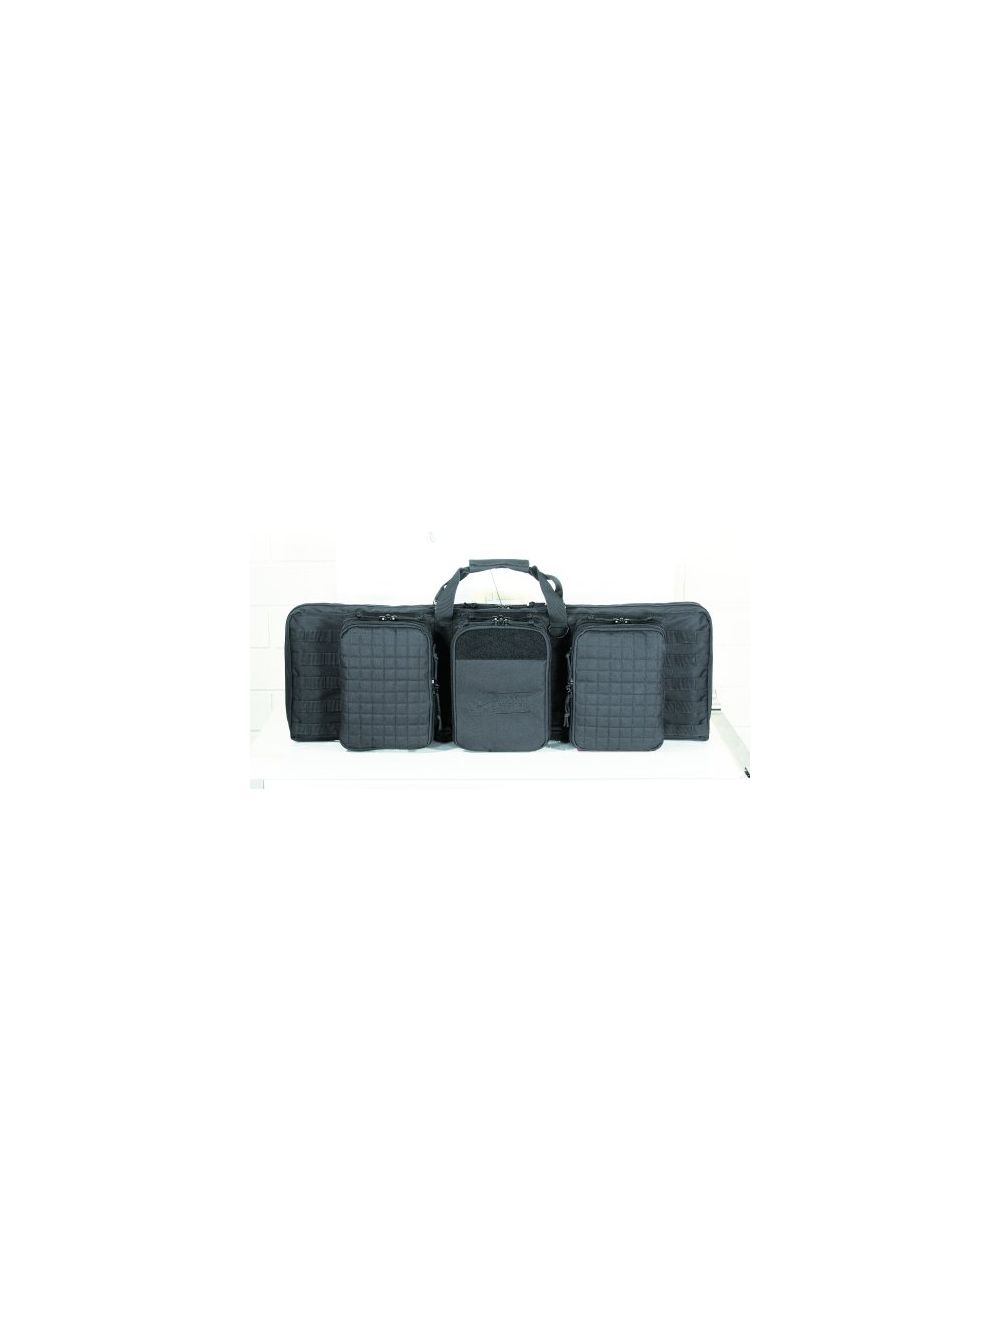 Deluxe Padded Weapons Case